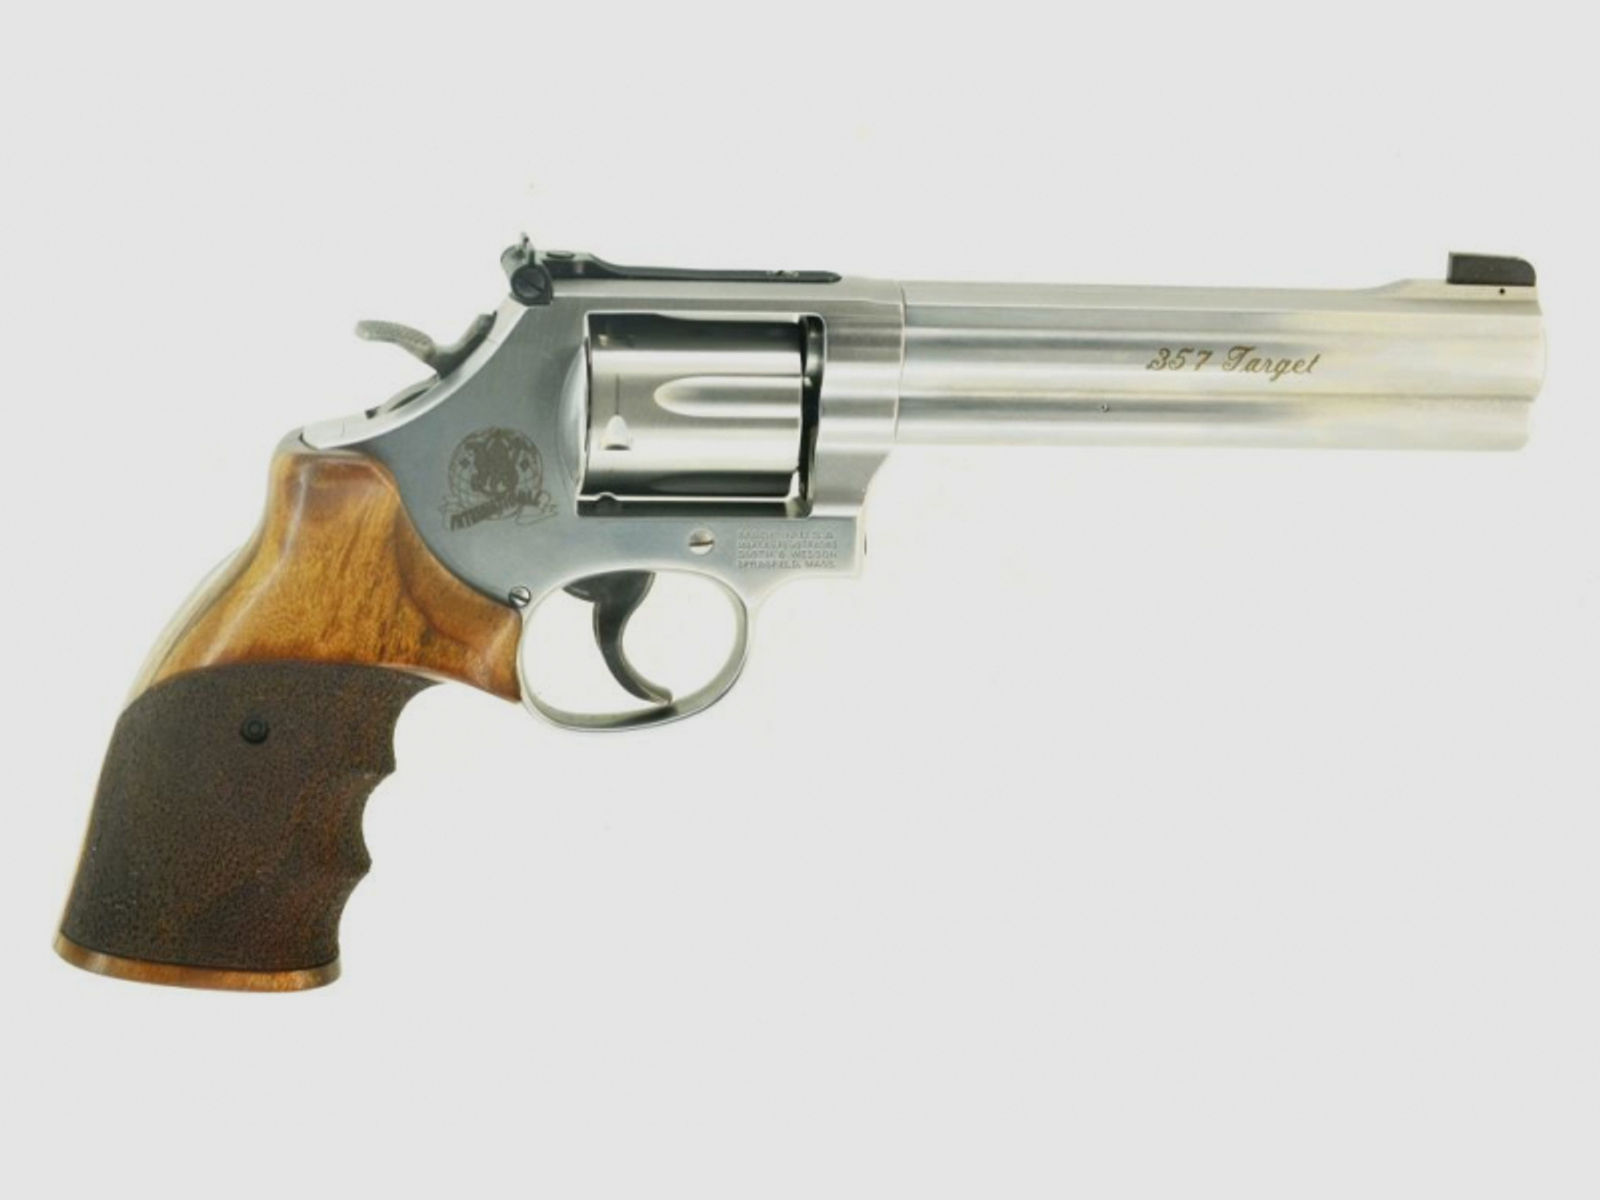 Revolver Smith & Wesson S&W Mod. 686-6 Target International Kal. .357 Magnum Bj. 2000, 6-Zoll, 1a!!!